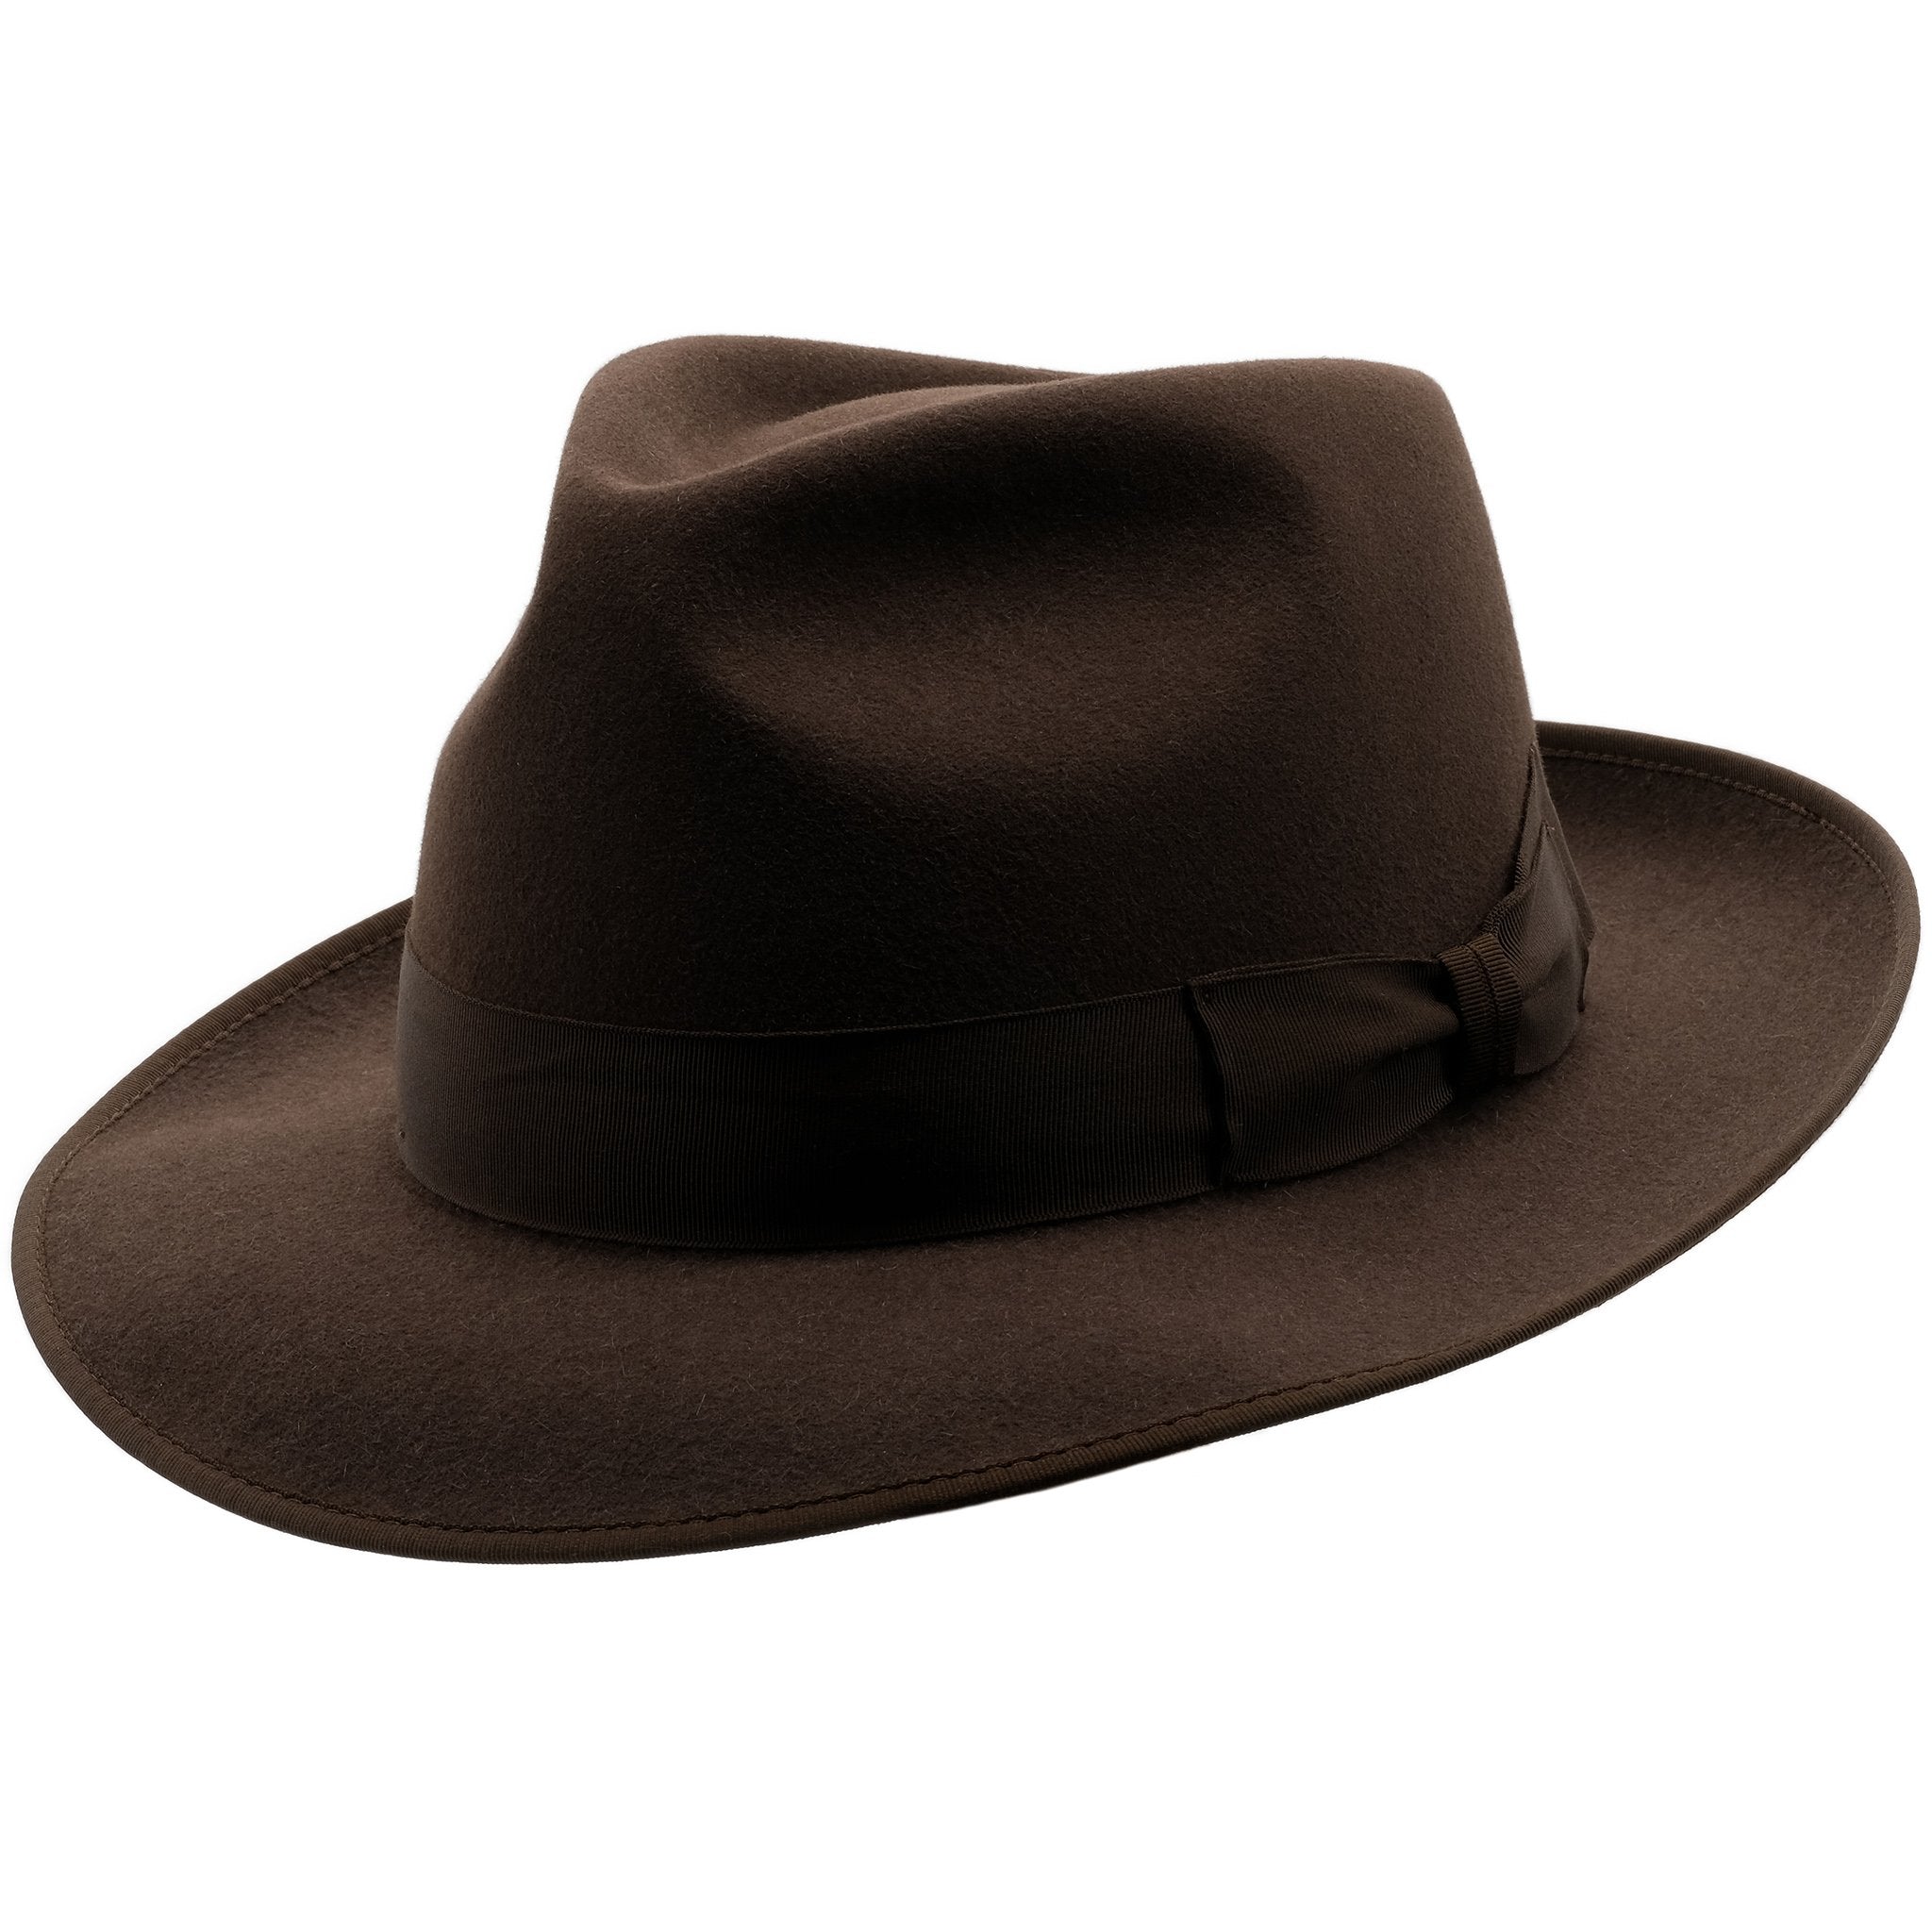 Angle view of Akubra Stylemaster hat in Loden colour